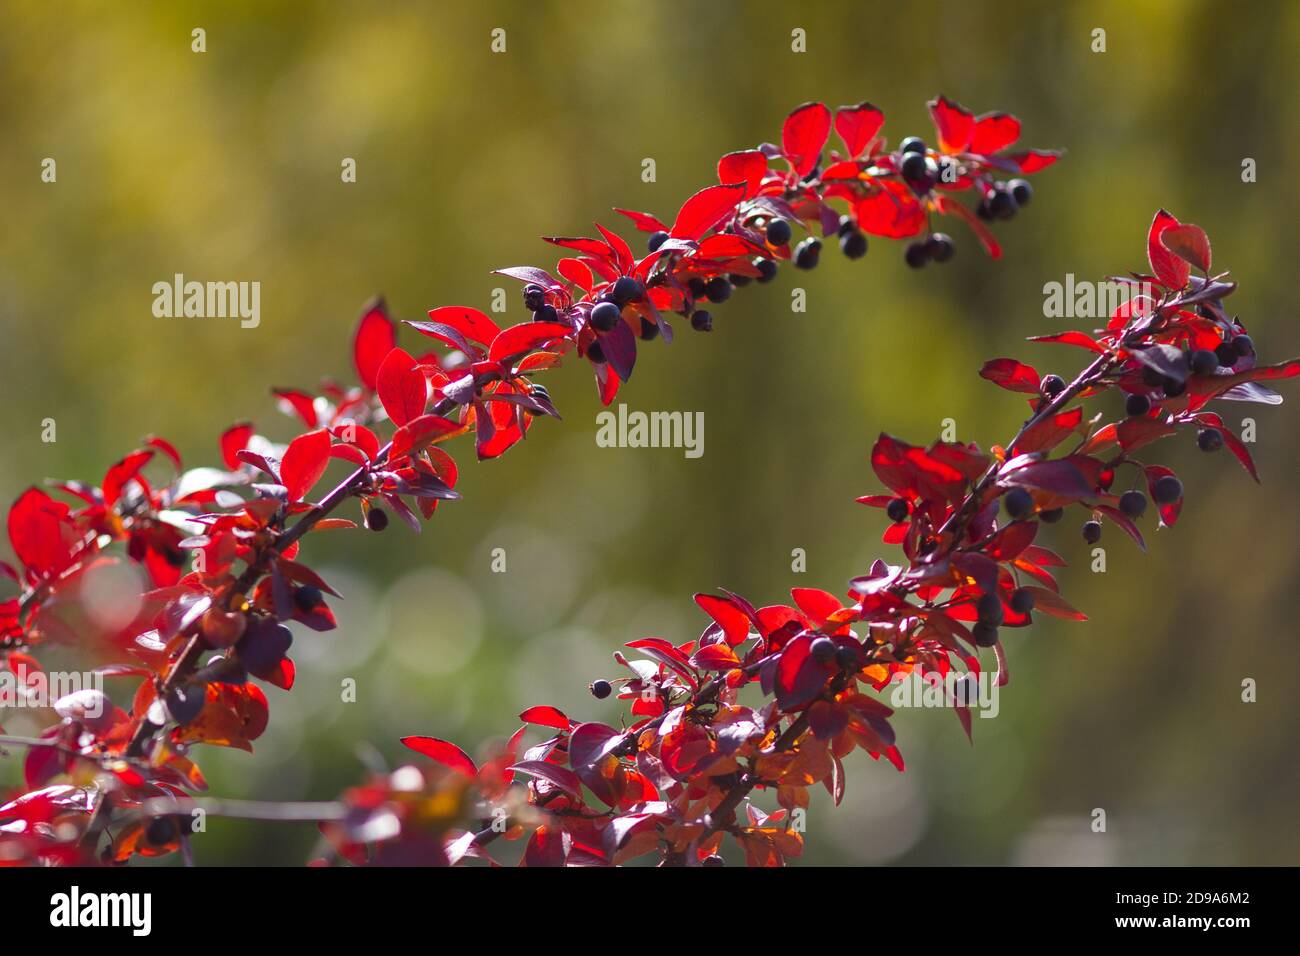 Real botanical backround: Cotoneaster lucidus with berries iluminated by sunlight on a beautiful autumn day Stock Photo